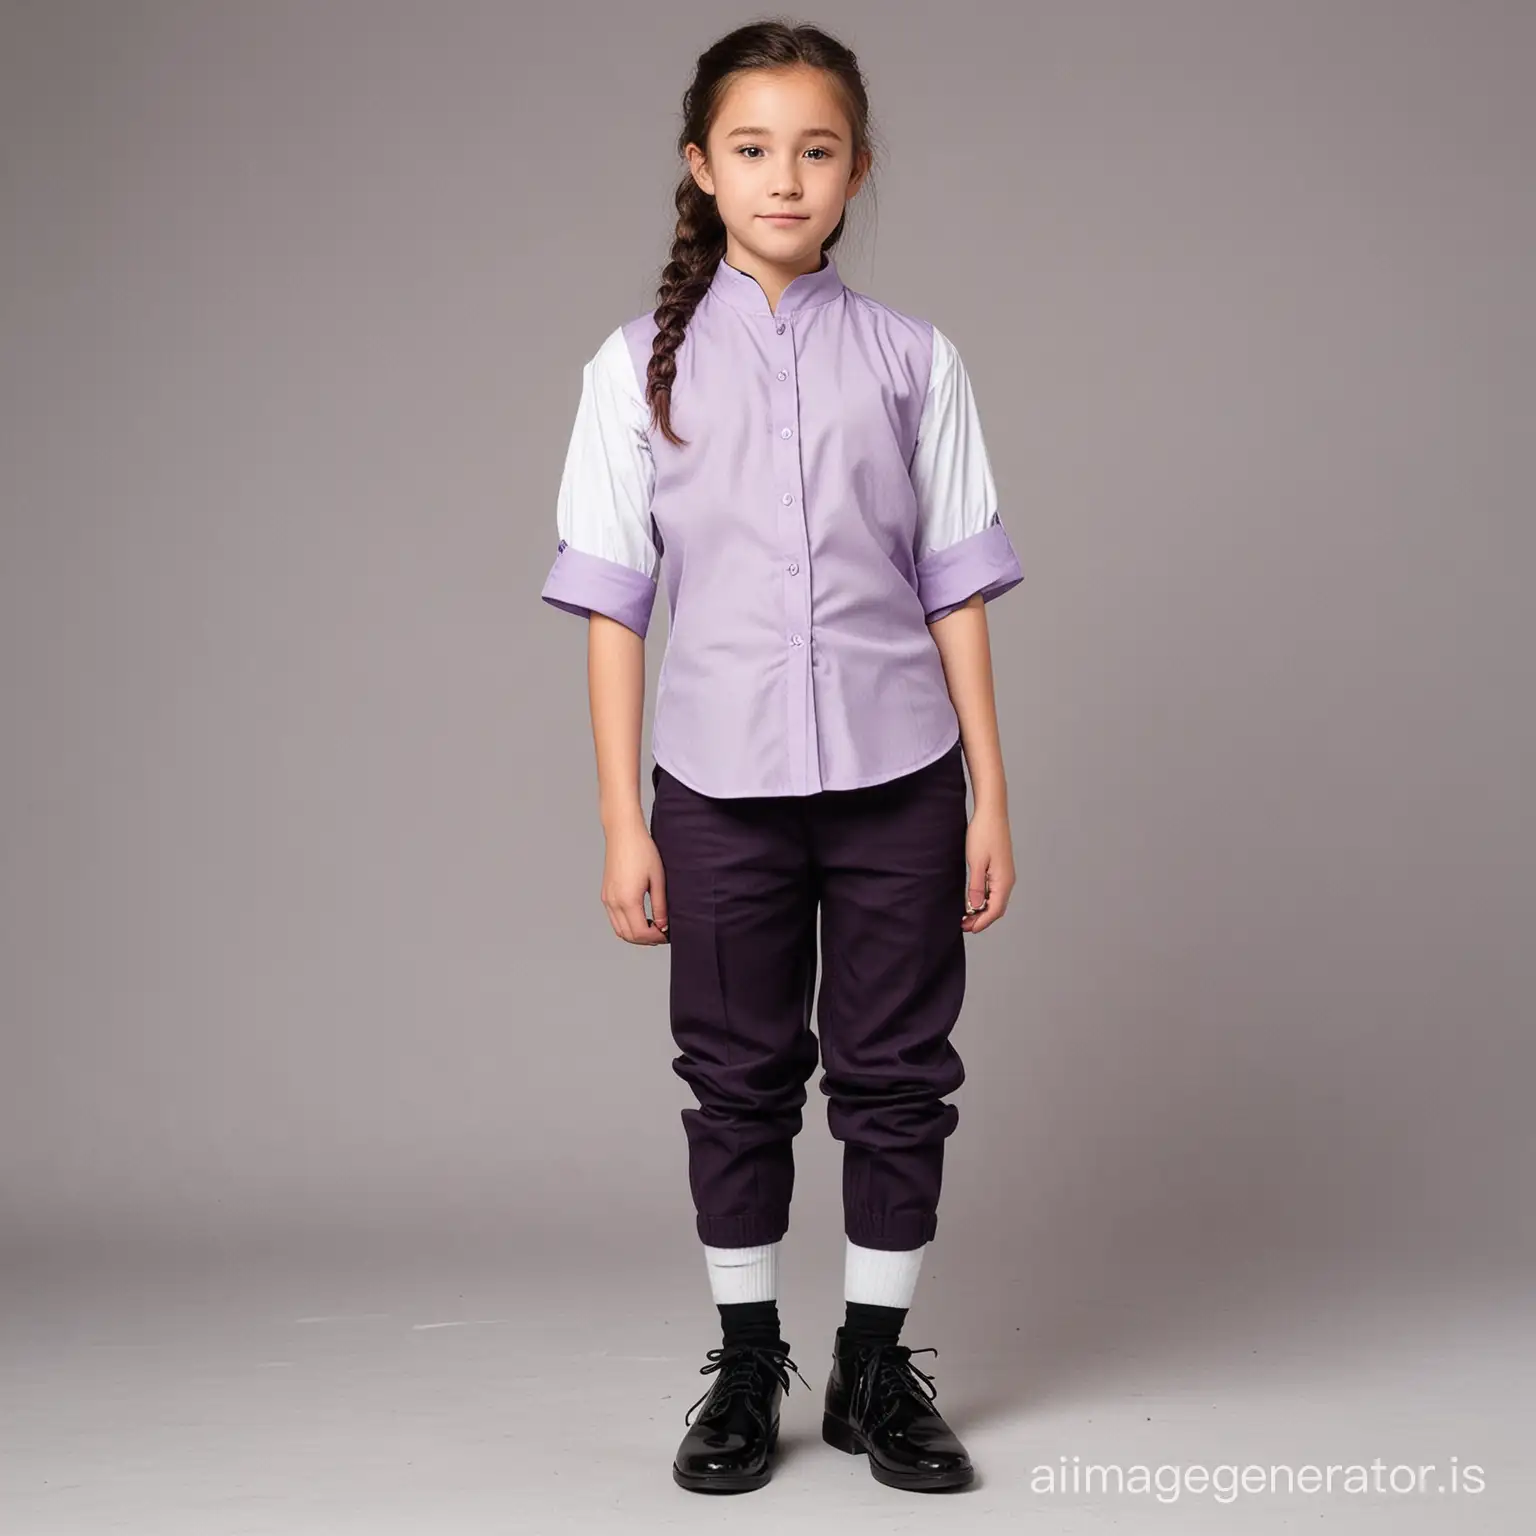 A 15 year old girl standing in a long shot. She is facing camera, wearing light lavender half sleeve shirt with Chinese collar. Her hair is single lined ponytailed. She wears a dark grape colored vest over the shirt. She wears dark grape colored full length pants. She has black cut shoes on her foot and white socks